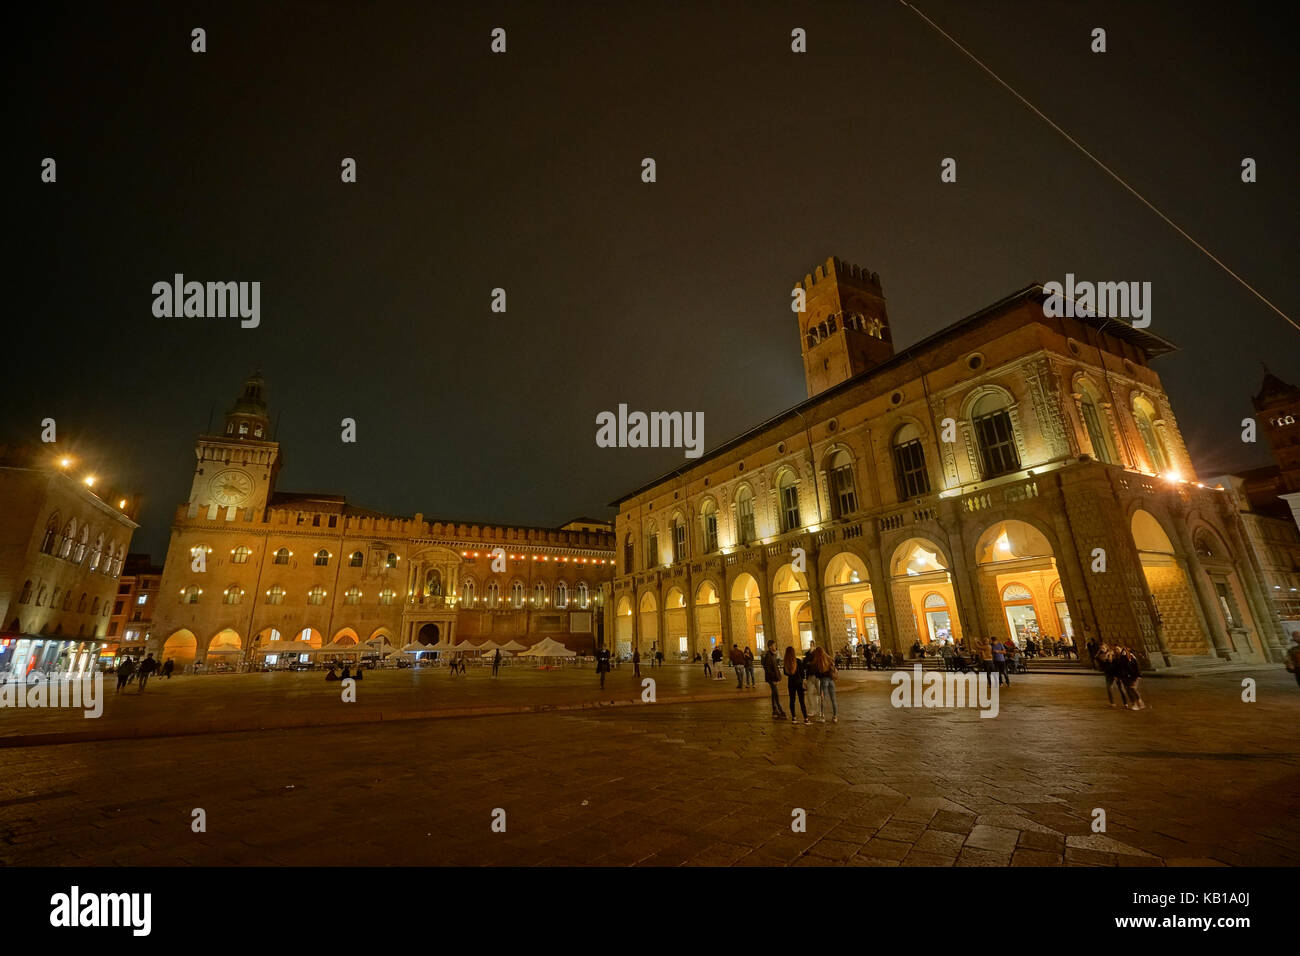 A night view of the Piazza Maggiore in Bologna. From a series of travel photos in Italy. Photo date: Friday, September 15, 2017. Photo credit should r Stock Photo